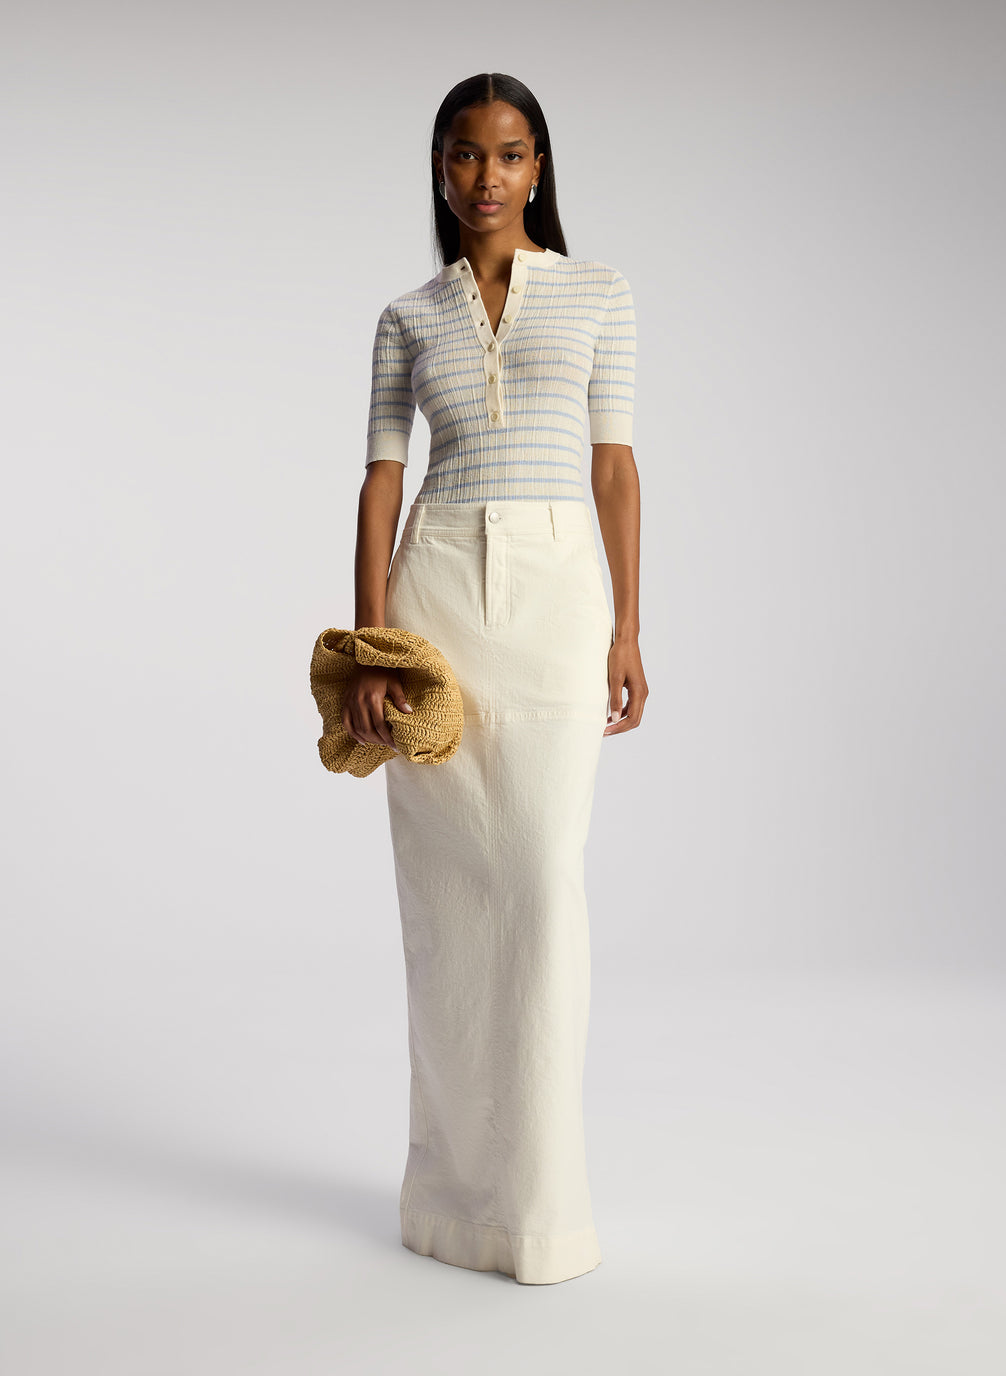 front view of woman wearing white and blue striped top and white maxi skirt